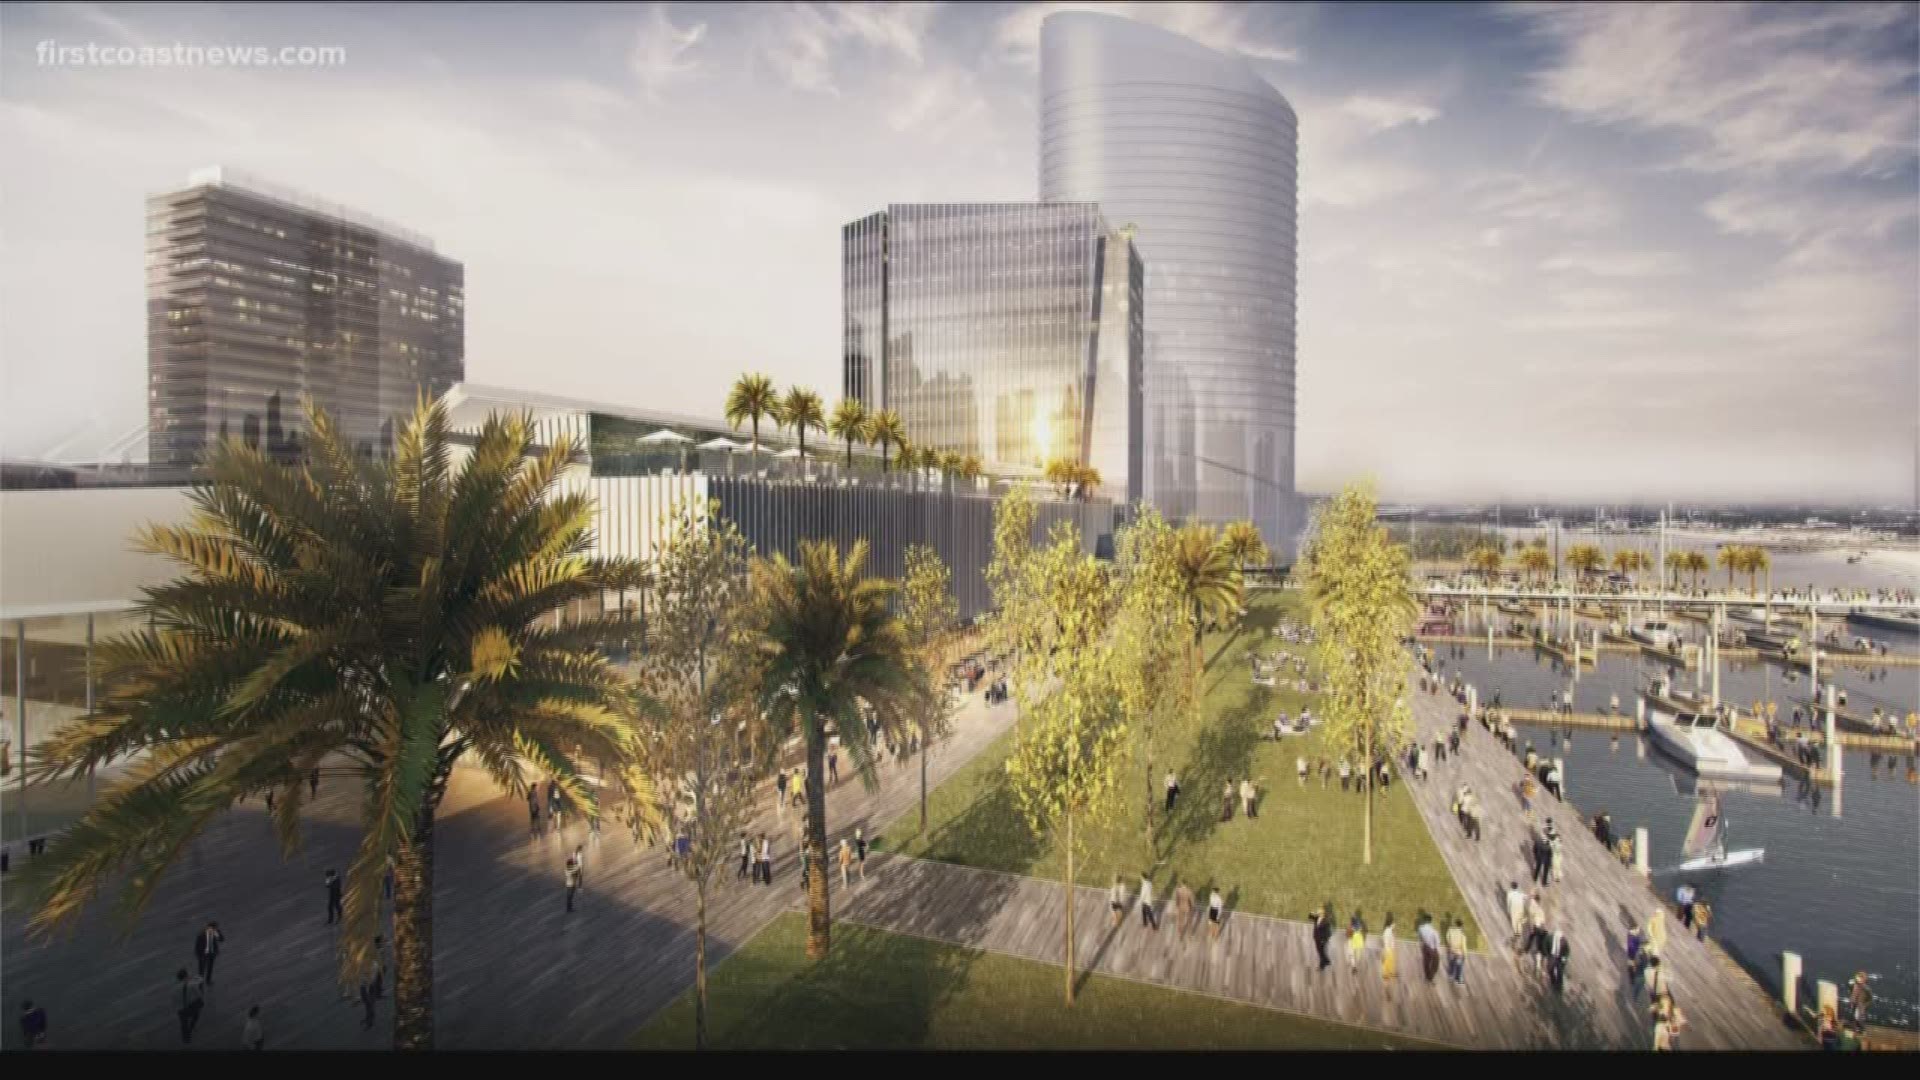 Iguana Investments, the development entity created by Jacksonville Jaguars owner Shad Khan, submitted its plans for the first phase of development of its proposed shipyards project to the Jacksonville Downtown Investment Authority (DIA) on Thursday.